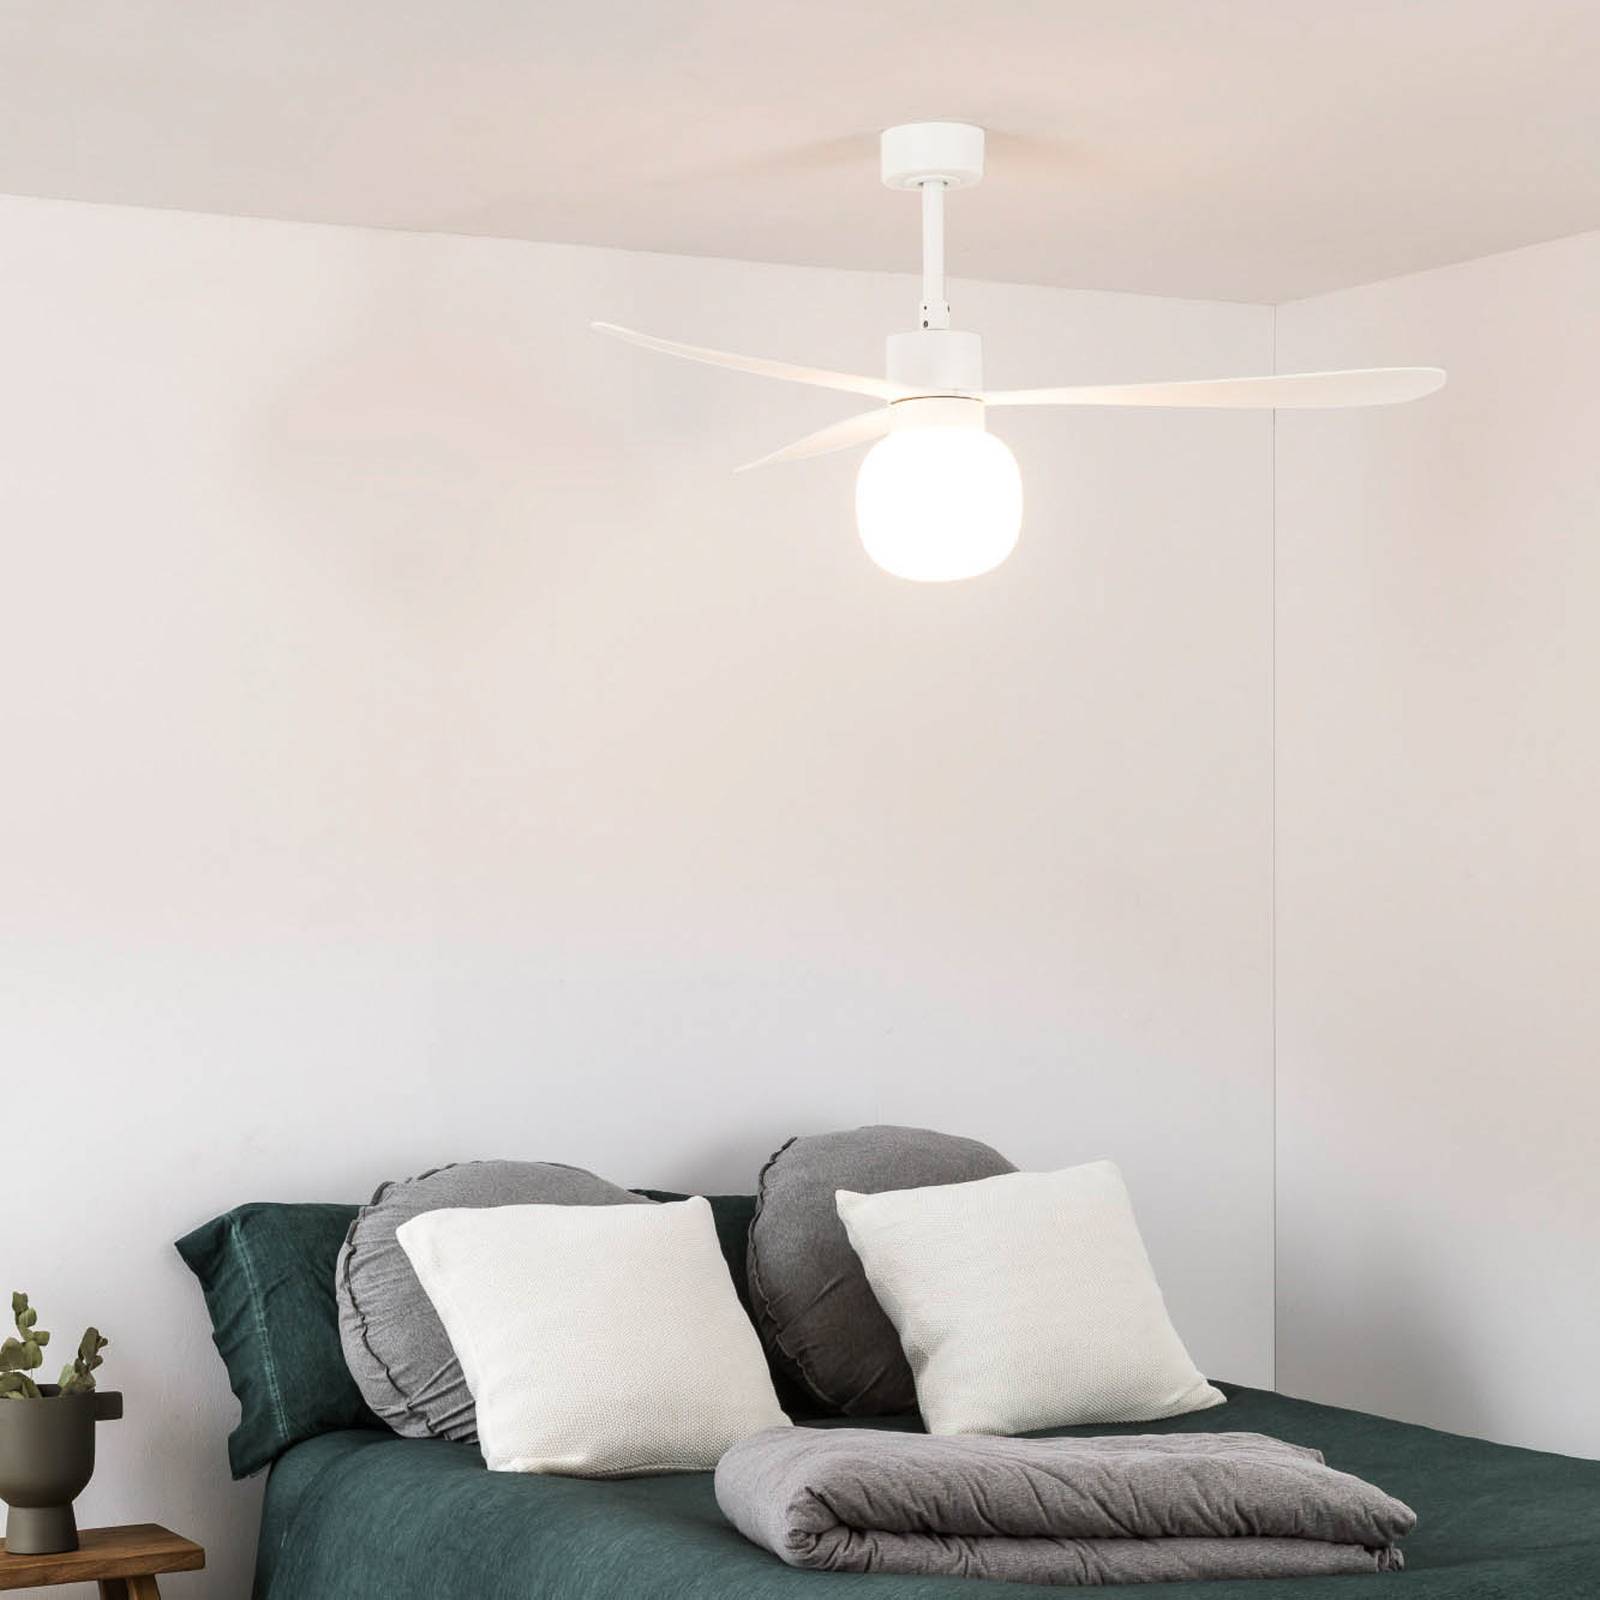 Photos - Chandelier / Lamp FARO BARCELONA Amelia Ball ceiling fan with an LED light, white 